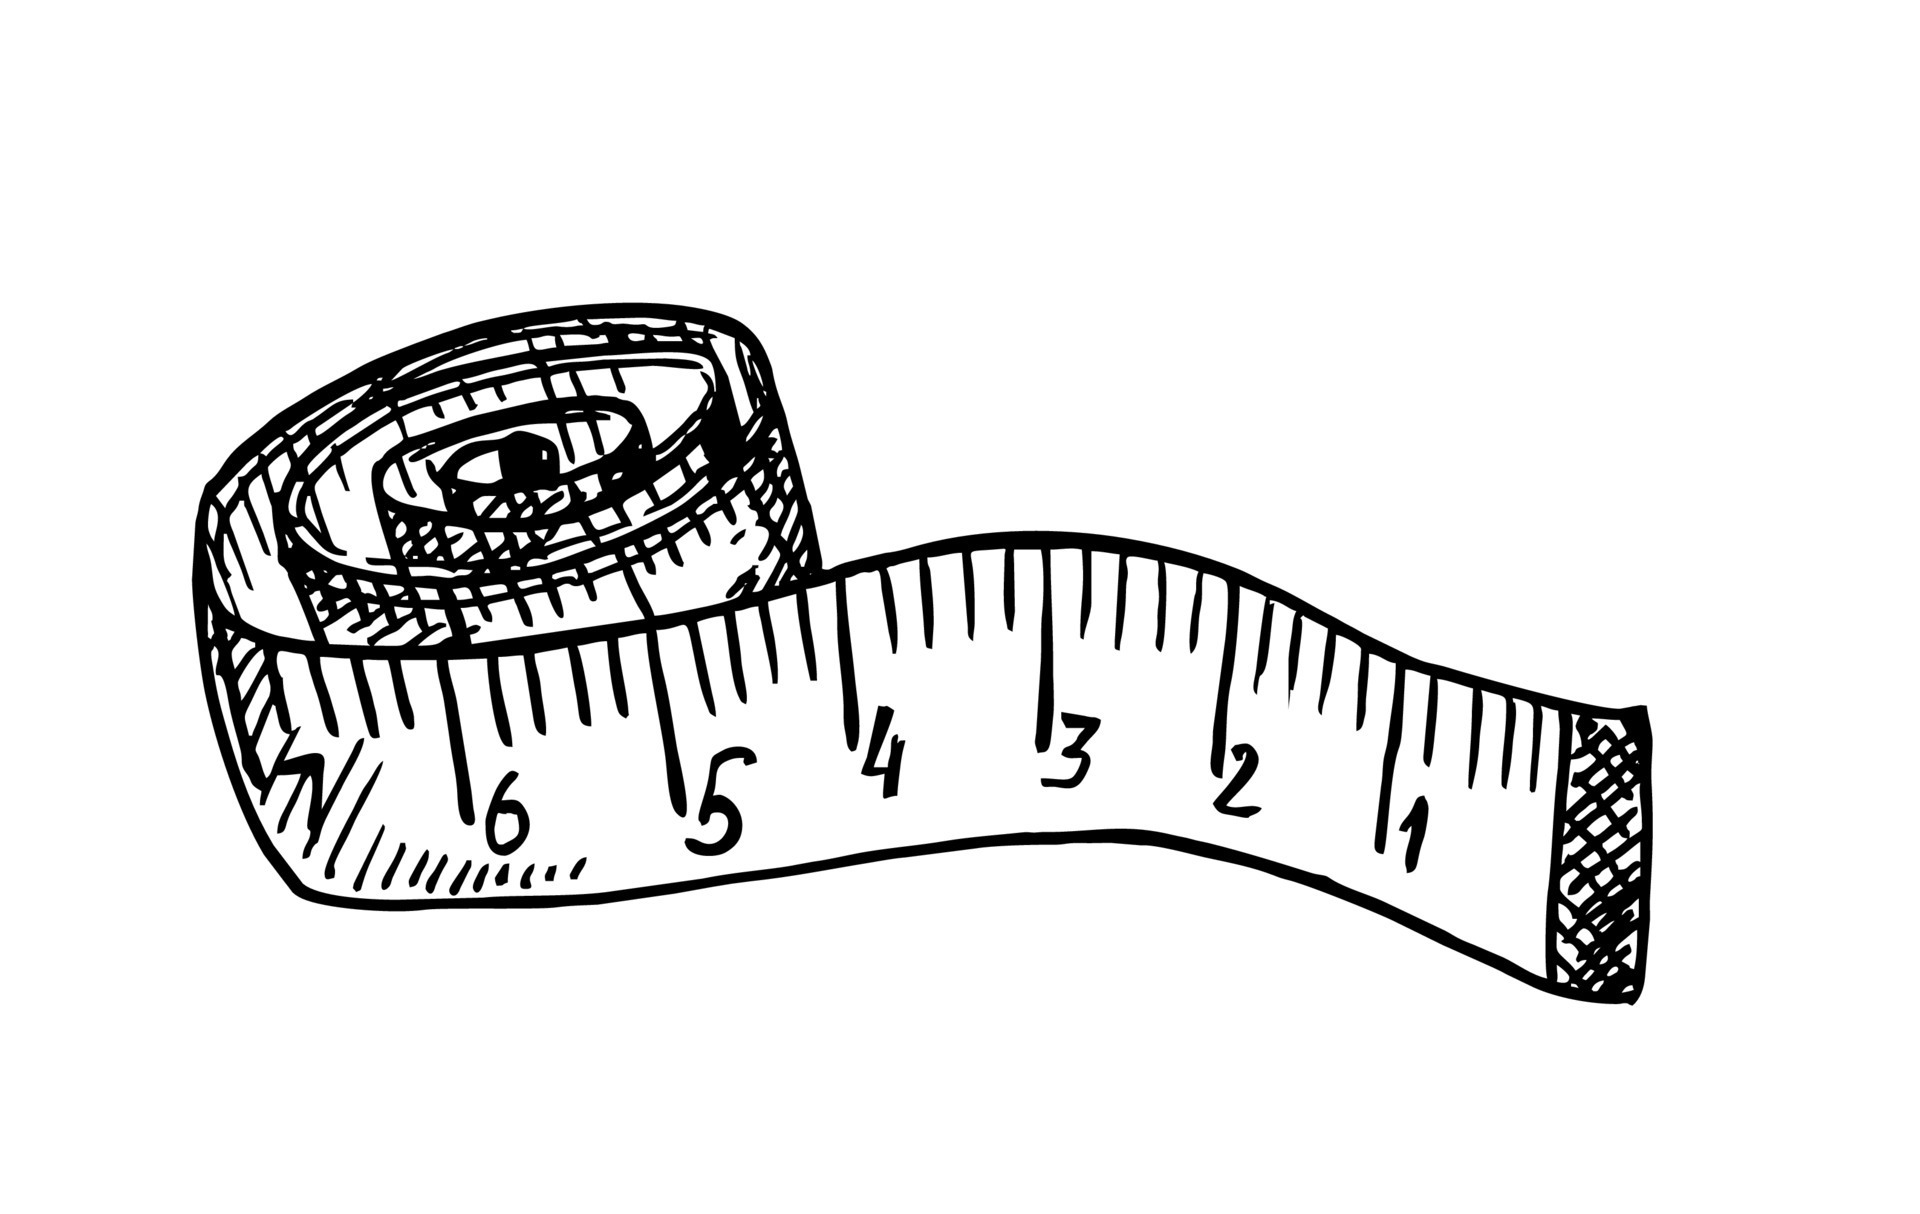 https://static.vecteezy.com/system/resources/previews/008/143/497/original/rolled-up-tape-measure-sketch-measuring-tape-sewing-craft-attribute-dressmaking-workshop-equipment-diet-weight-loss-symbol-length-size-measurement-tool-professional-tailor-instrument-vector.jpg